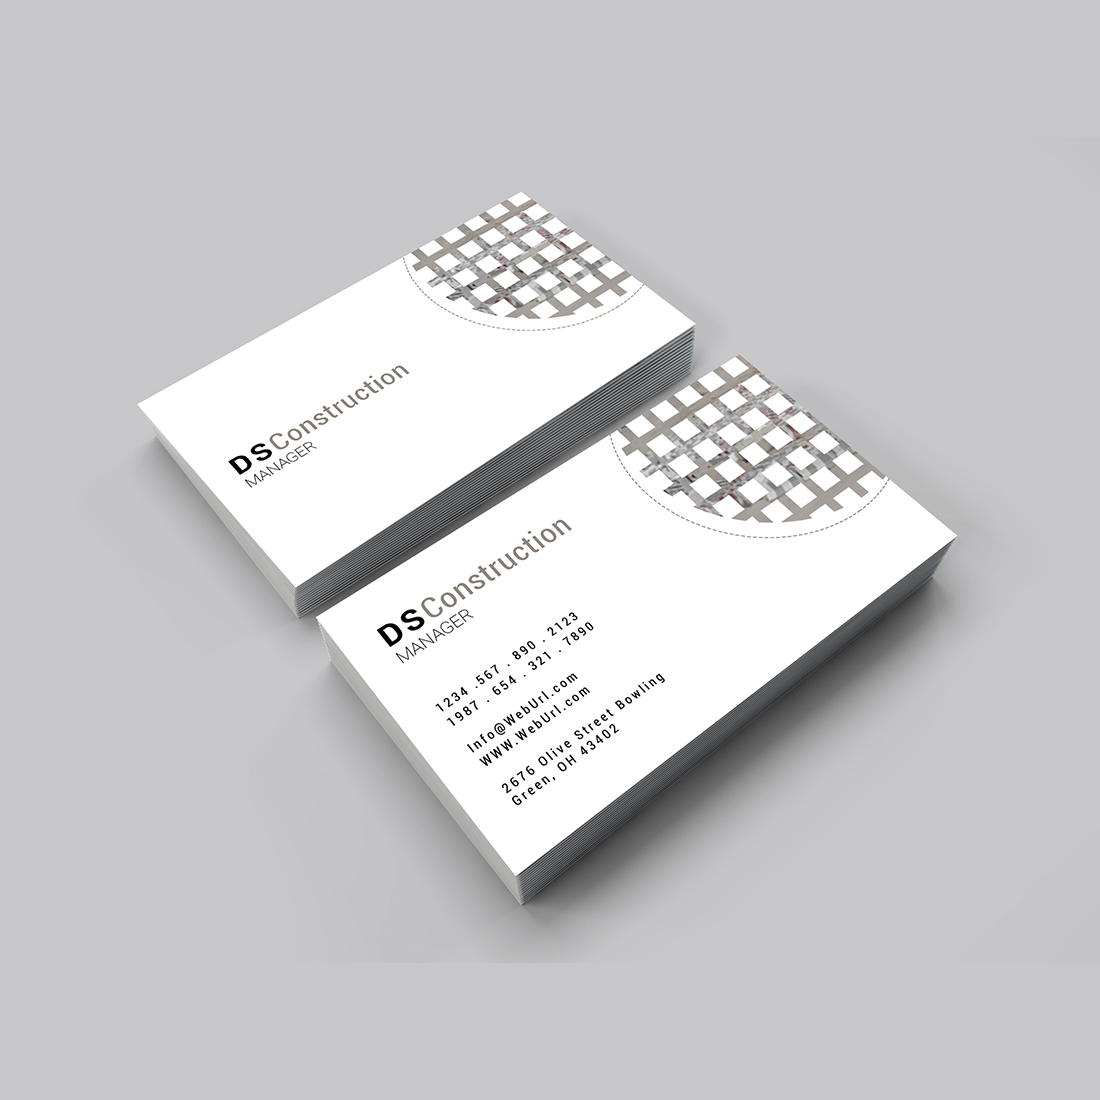 Construction business card design cover image.